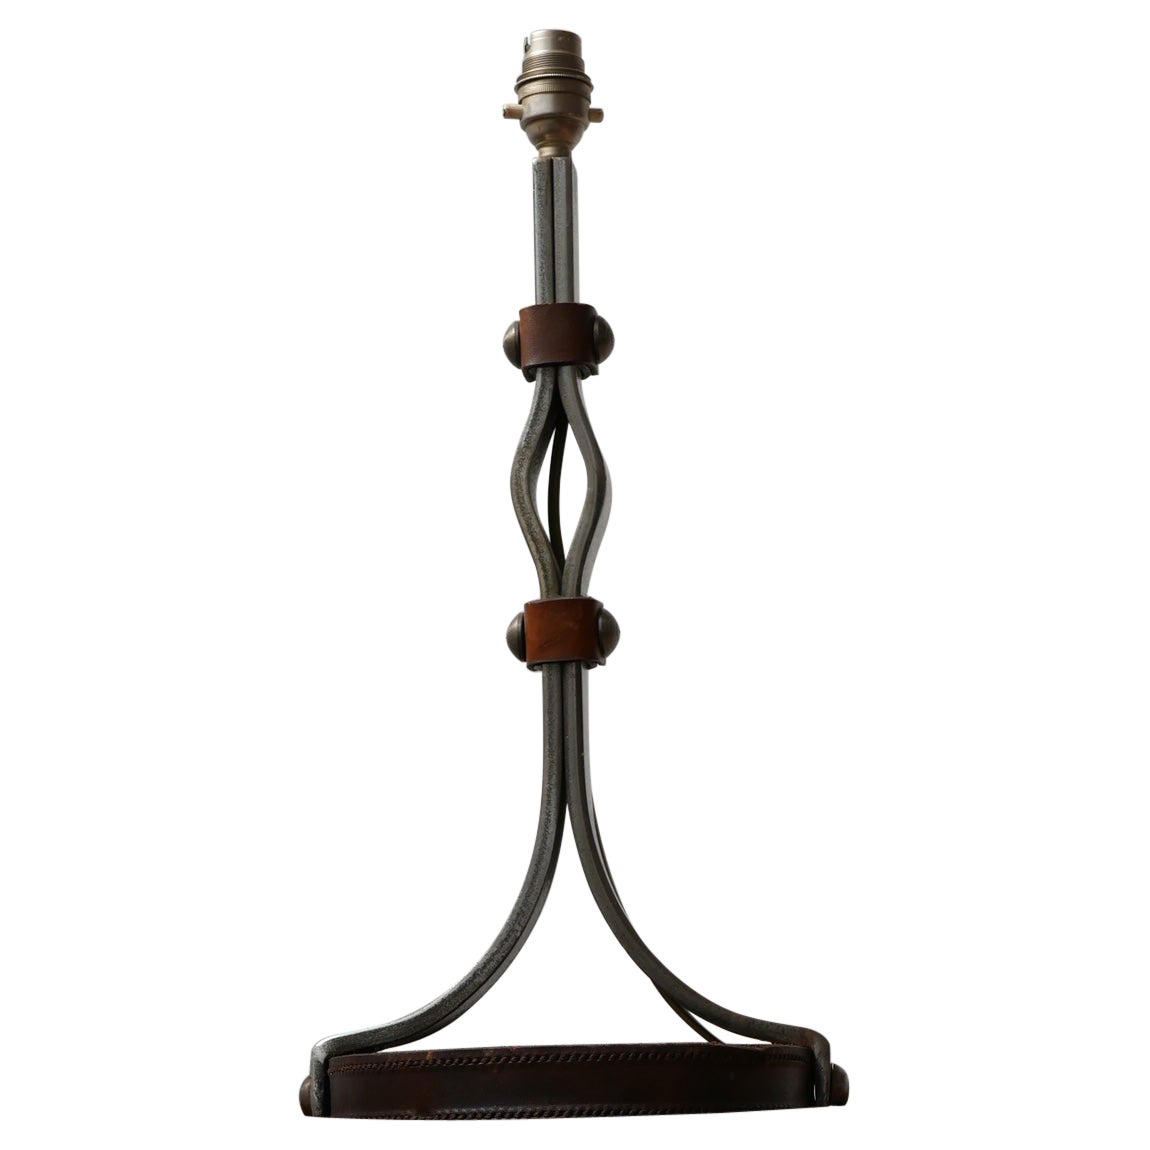 Mid-Century Leather and Iron Table Lamp by Jean-Pierre Ryckaert